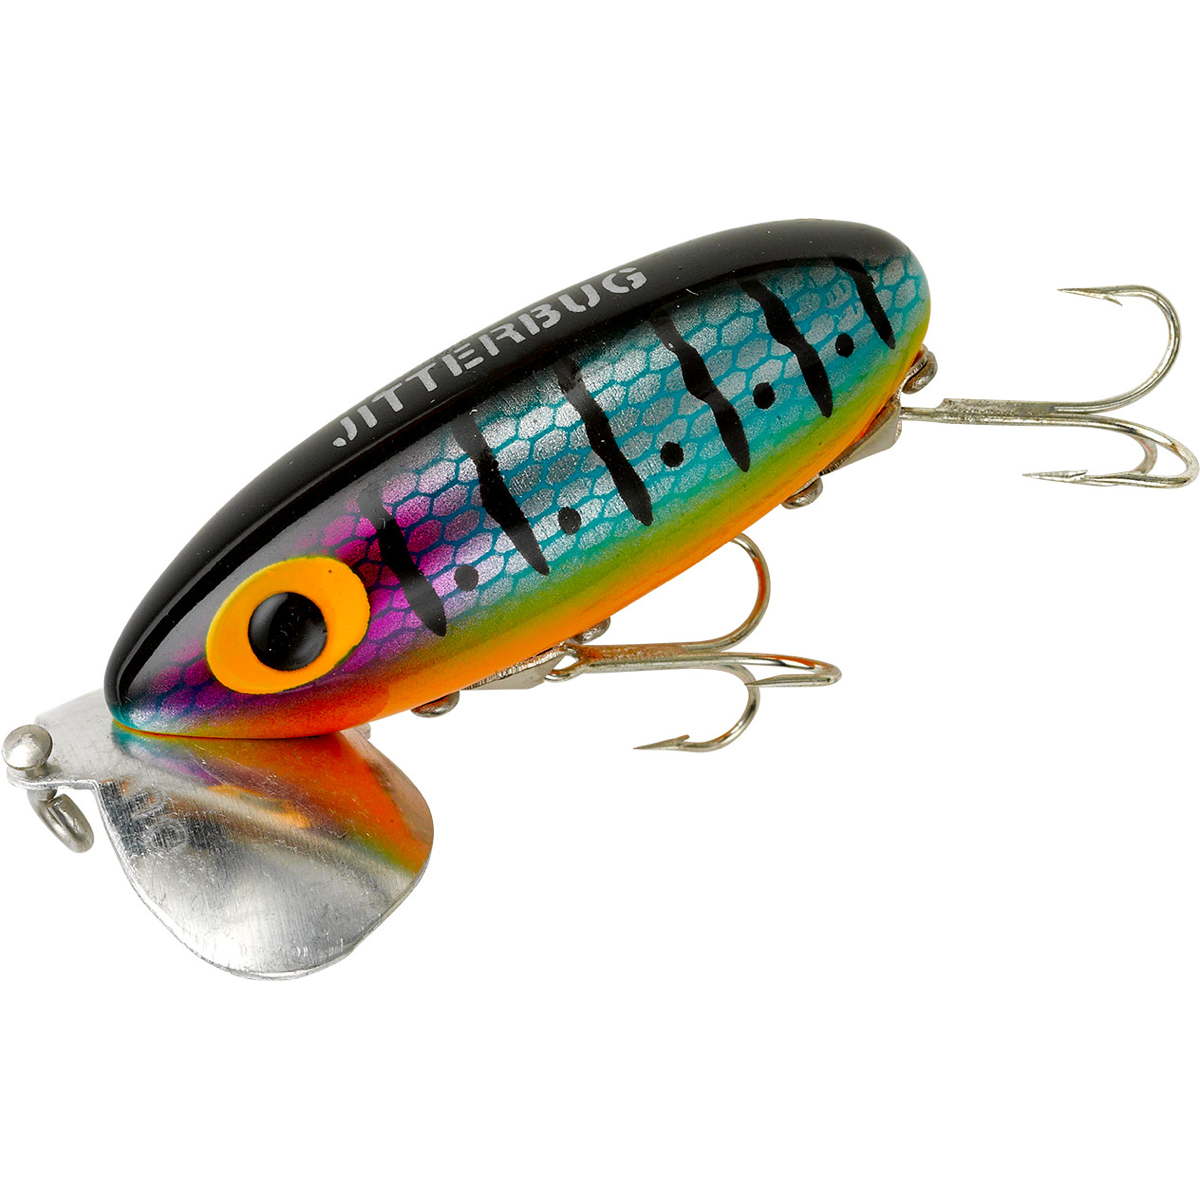 Photo of Arbogast Jitterbug with Clicker for sale at United Tackle Shops.